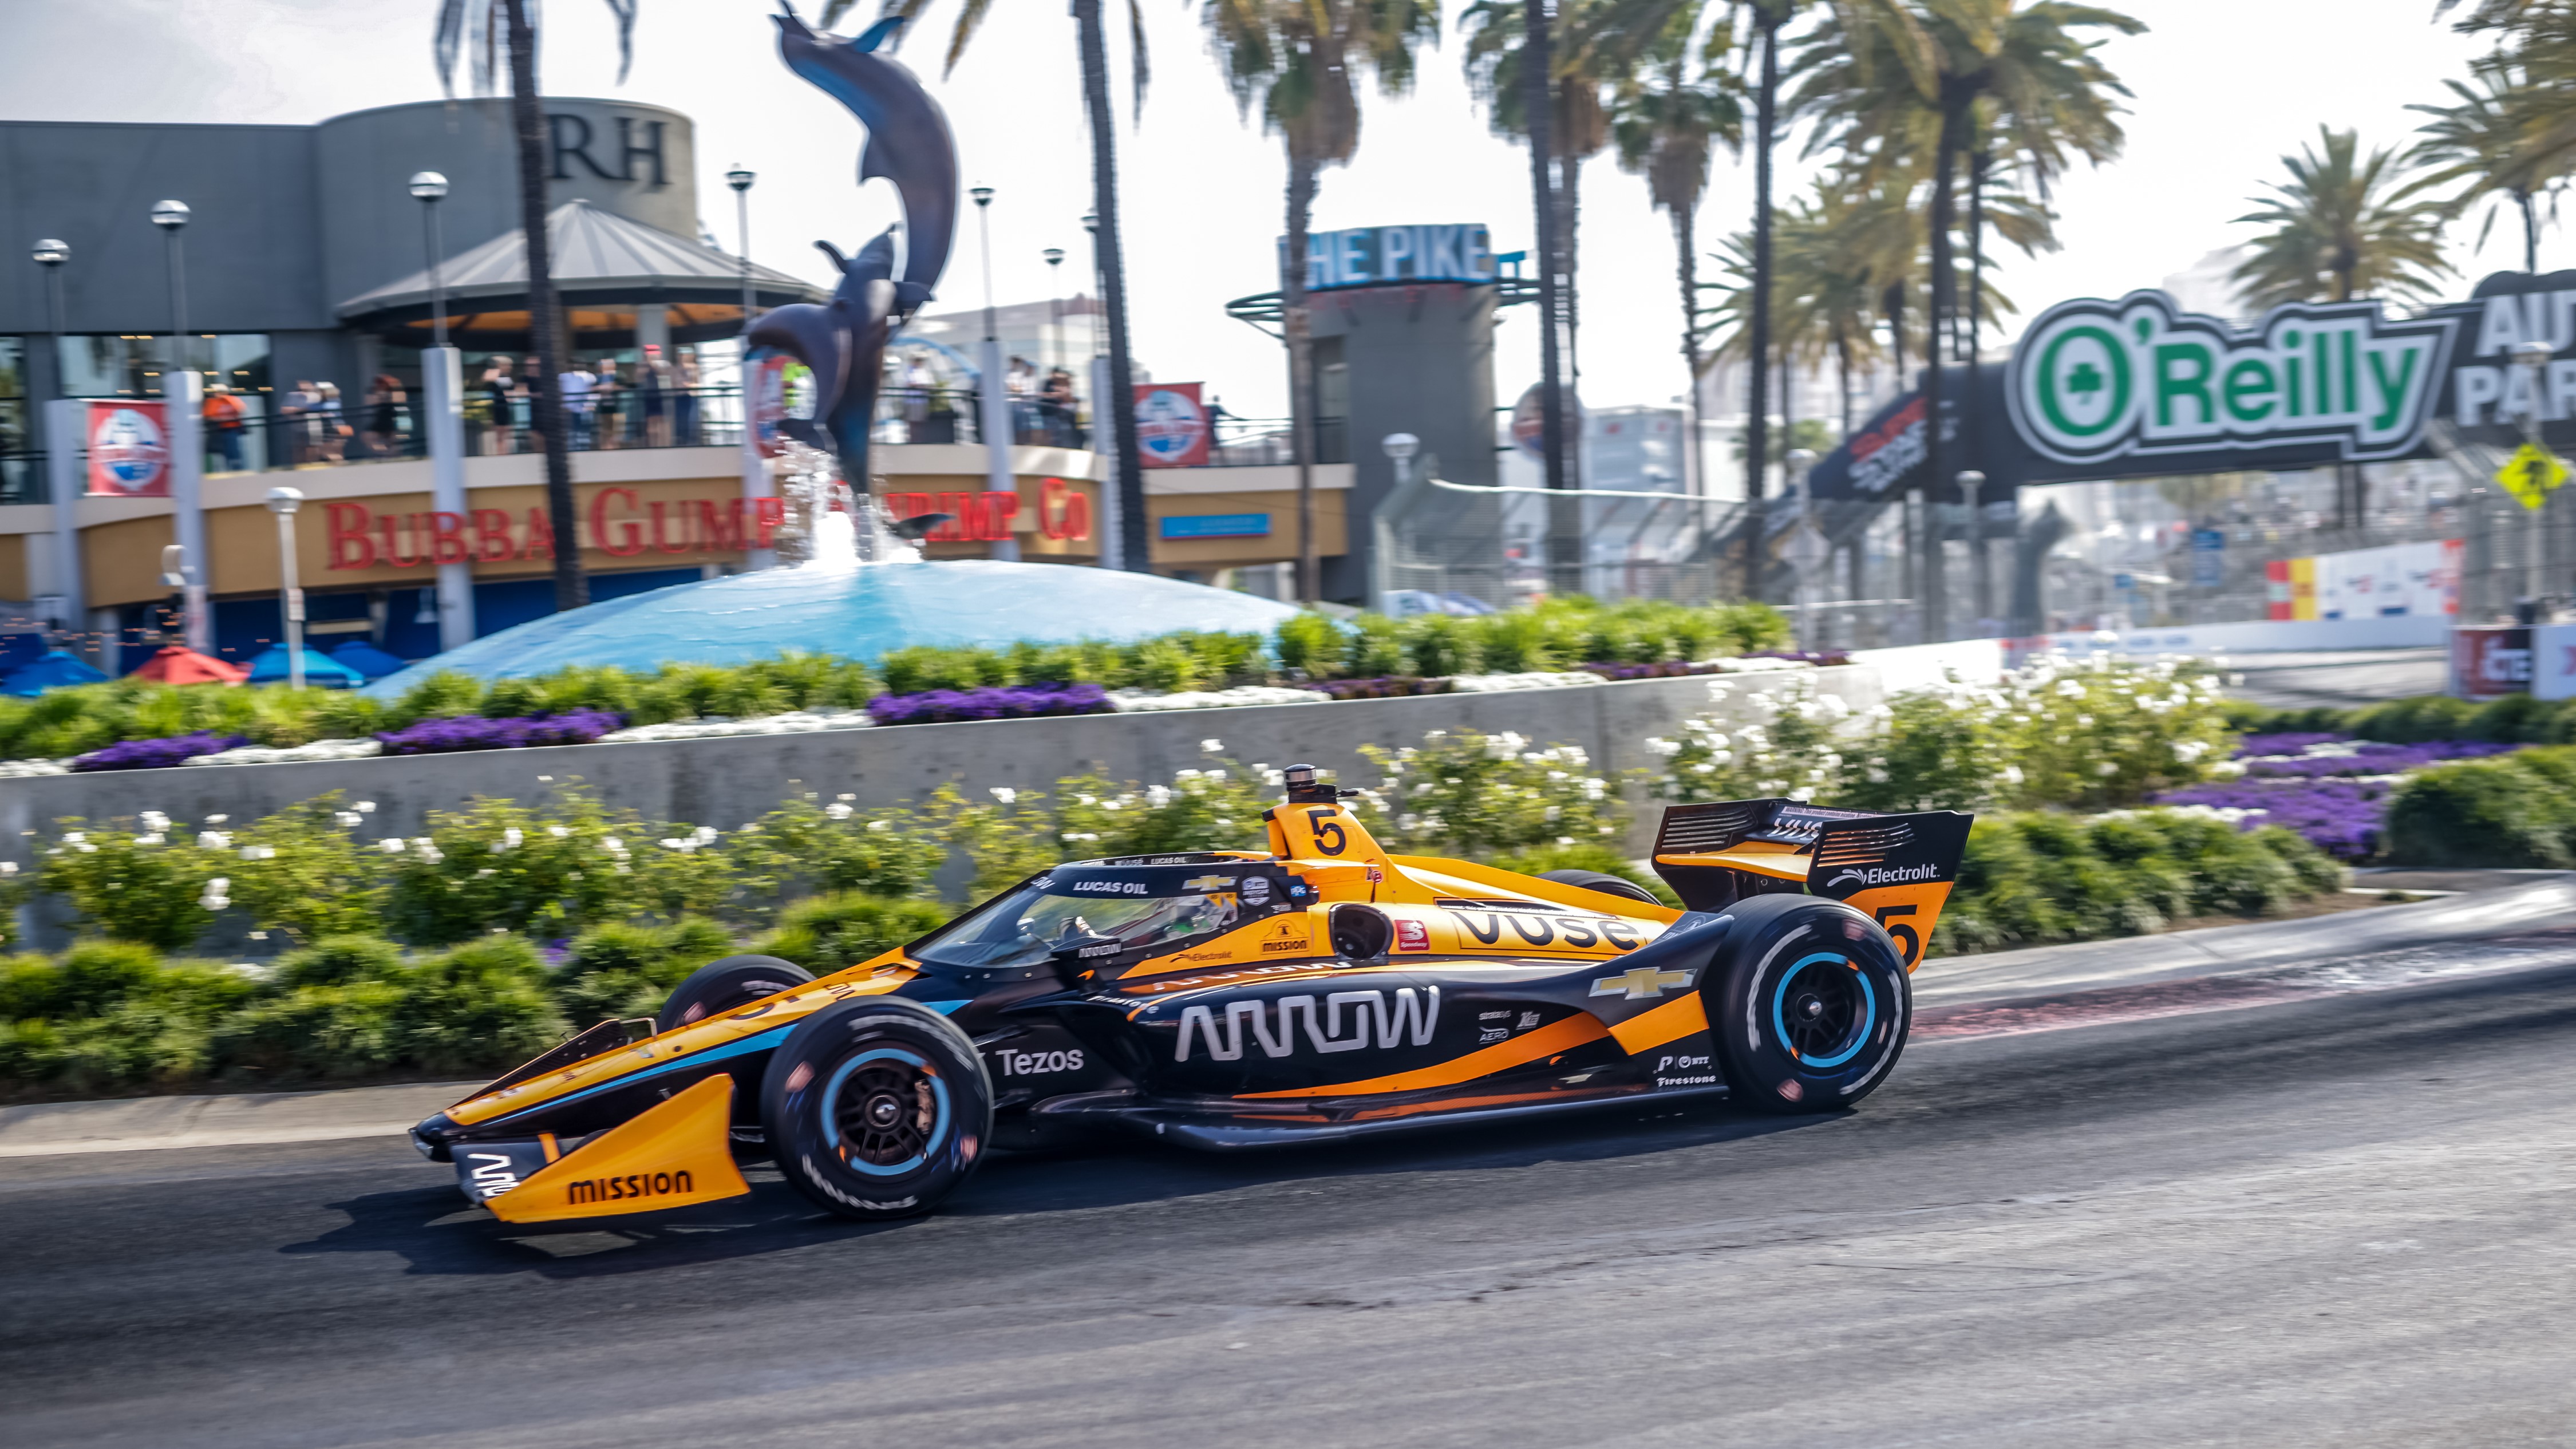 How to Watch the Grand Prix of Long Beach